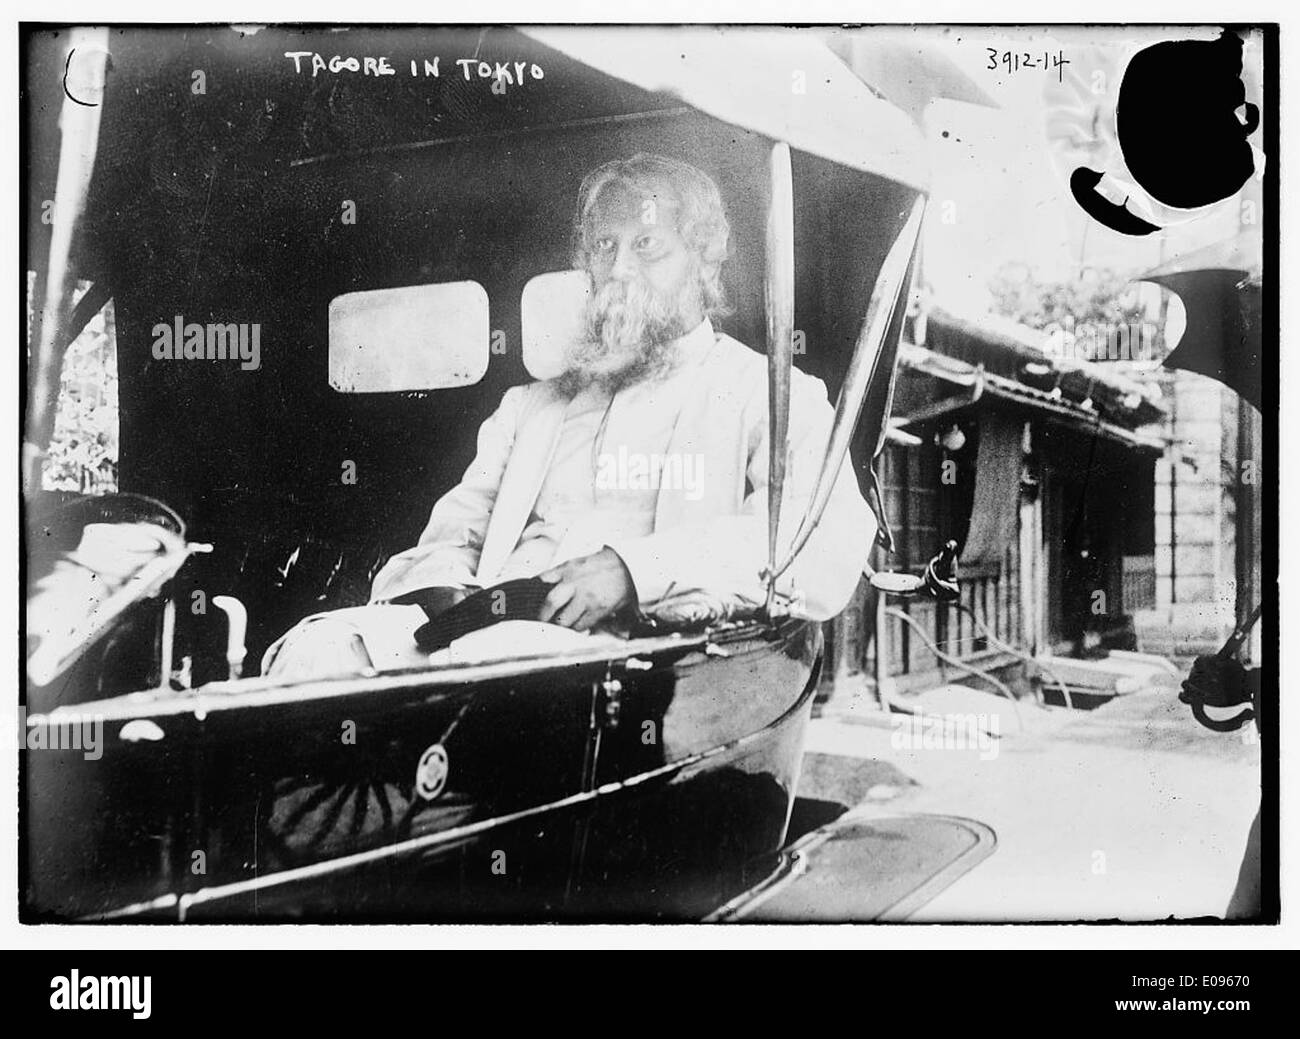 Tagore in Tokyo (LOC) Stock Photo